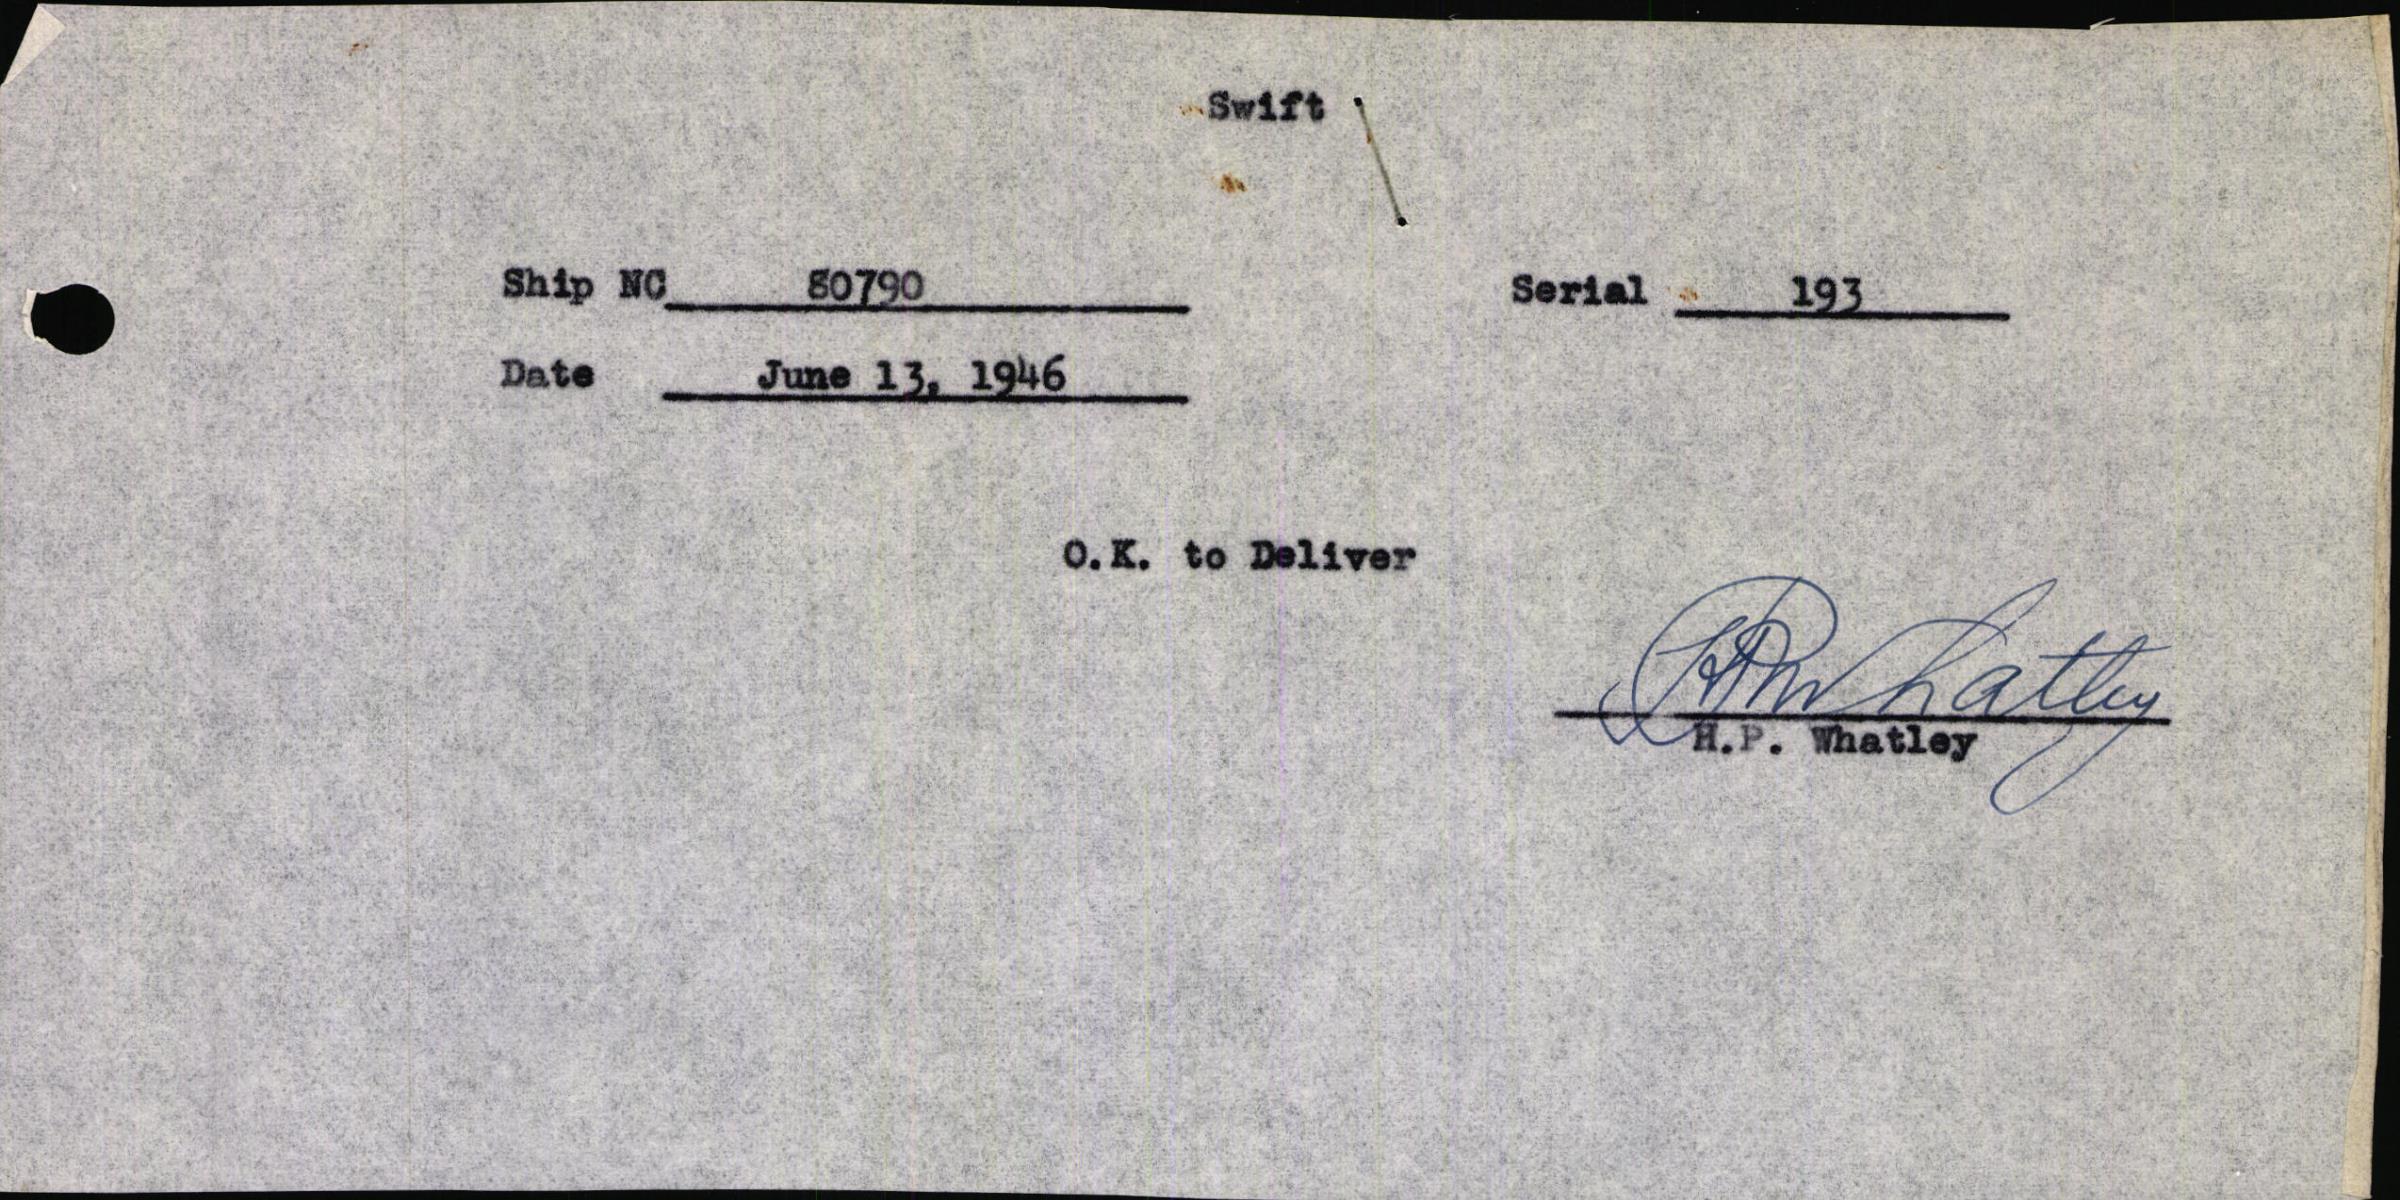 Sample page 3 from AirCorps Library document: Technical Information for Serial Number 193